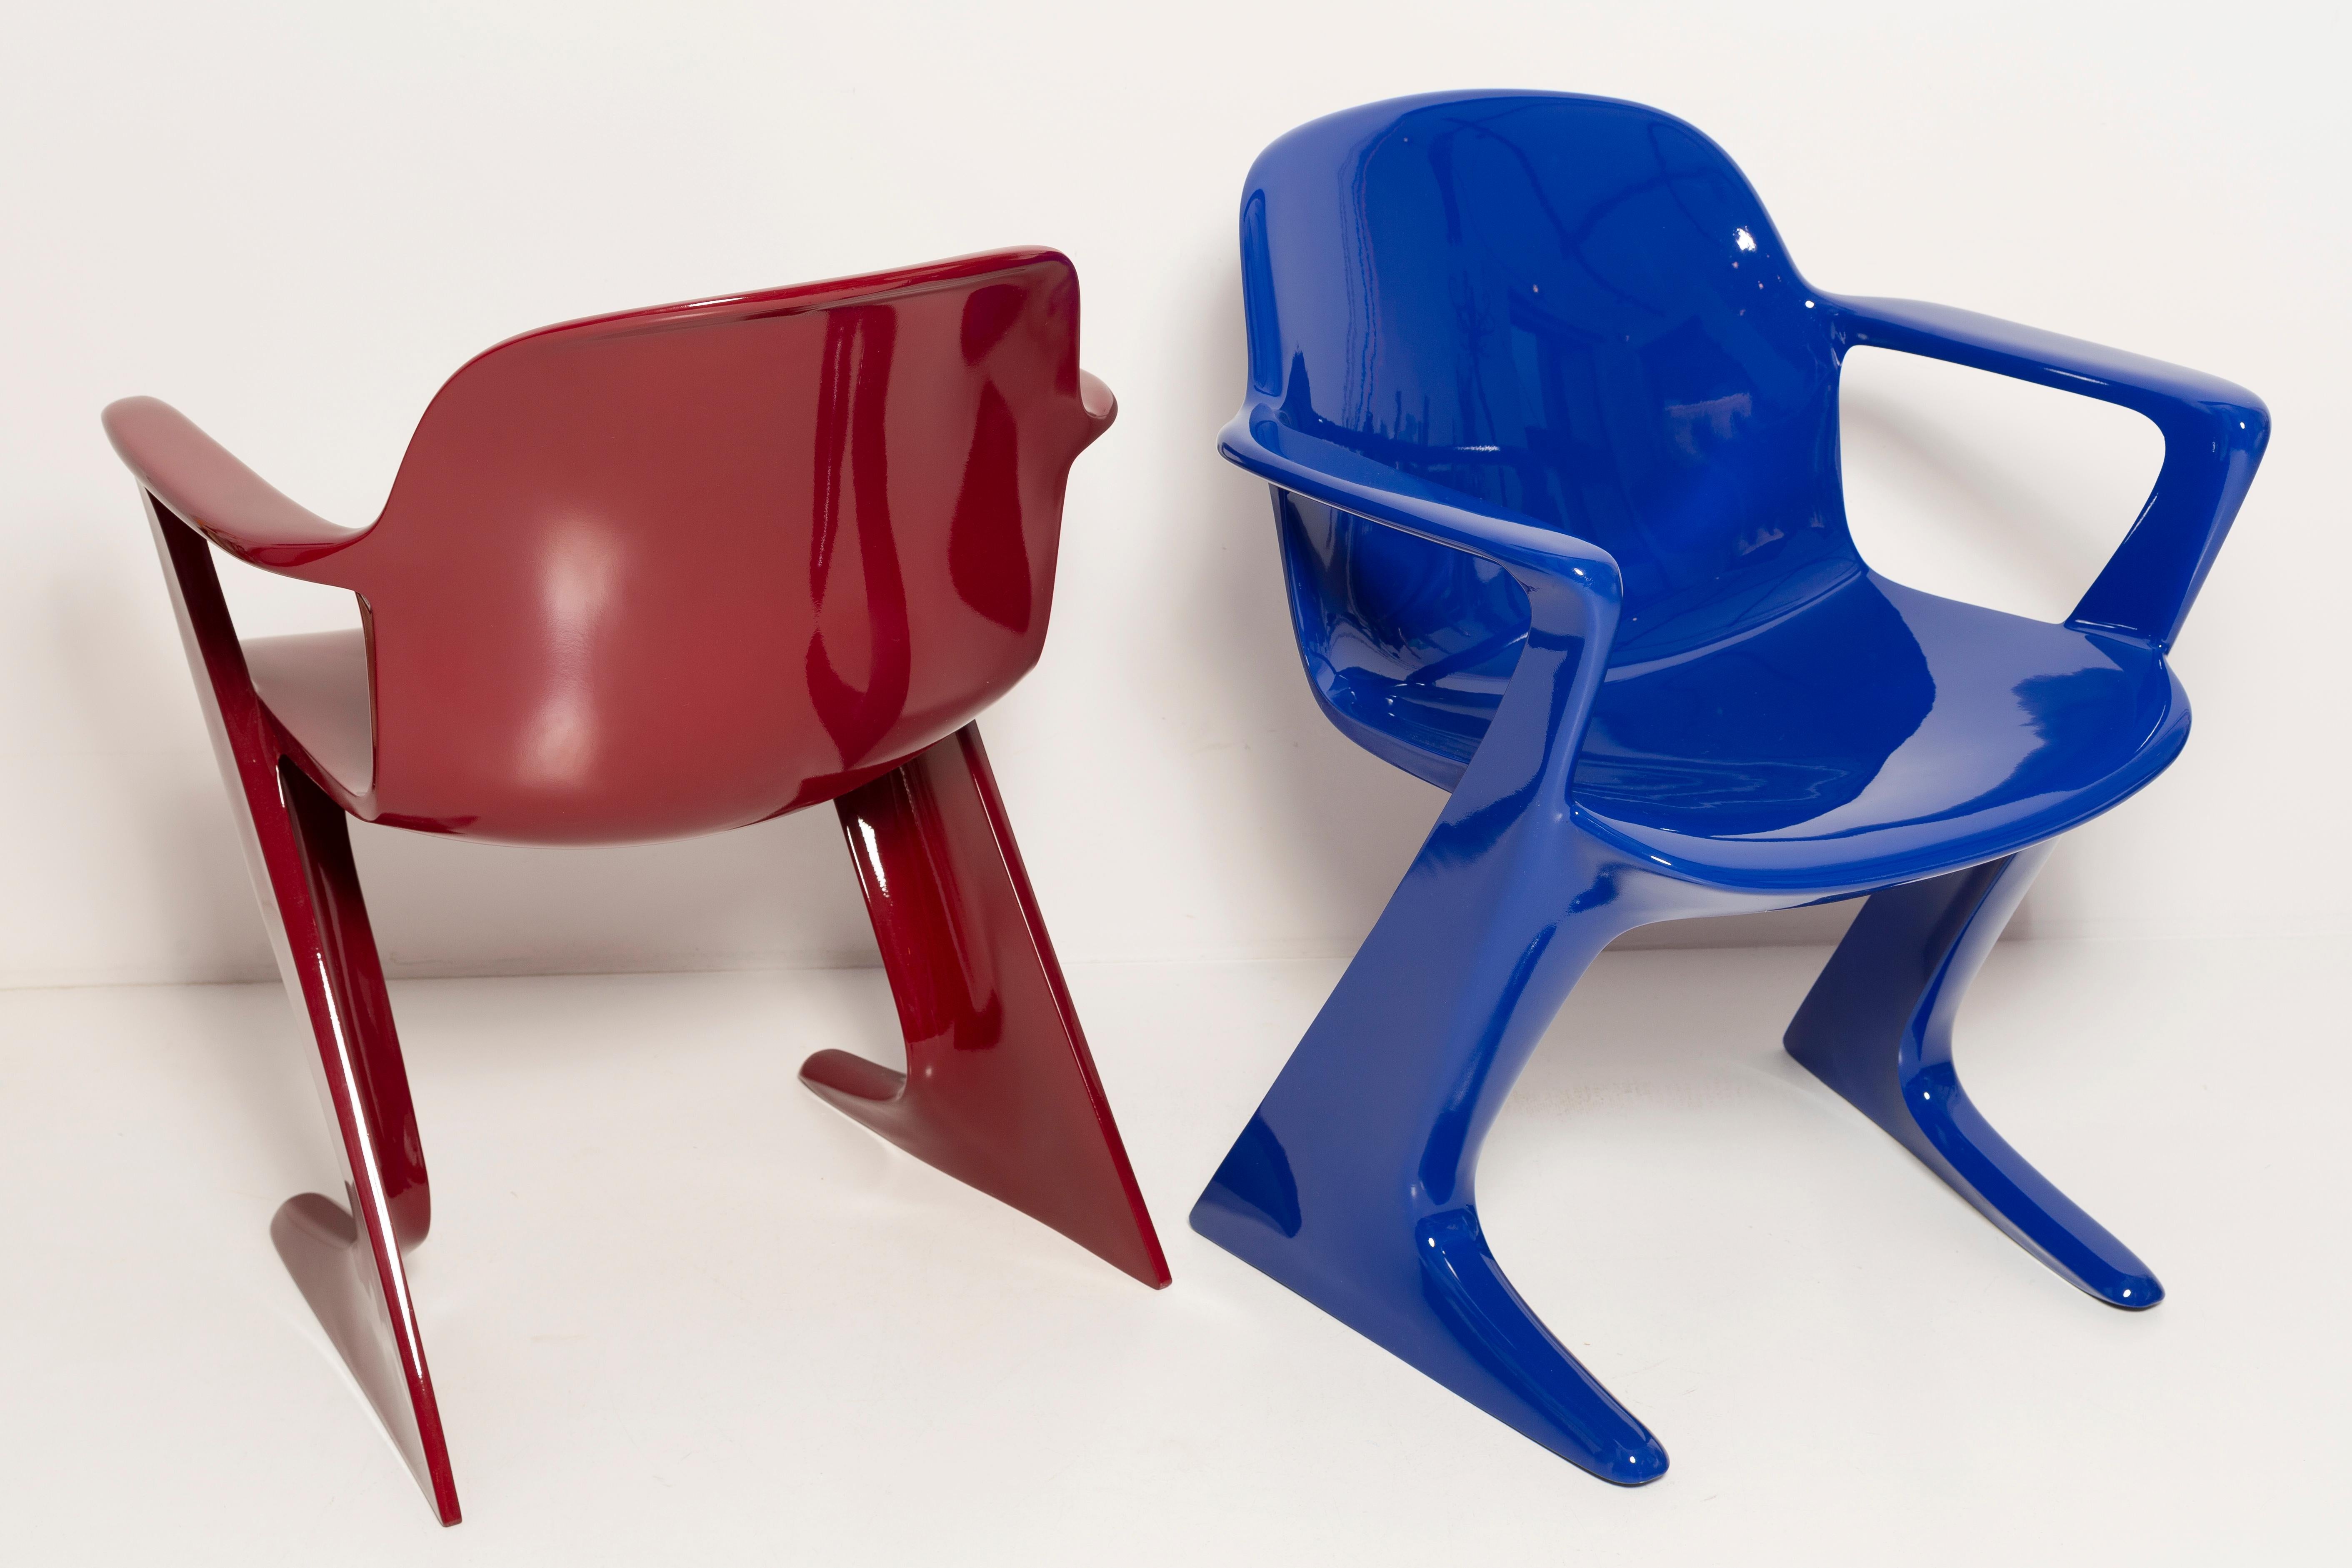 Two Mid-Century Burgundy Red and Blue Kangaroo Chairs Ernst Moeckl Germany, 1968 For Sale 1